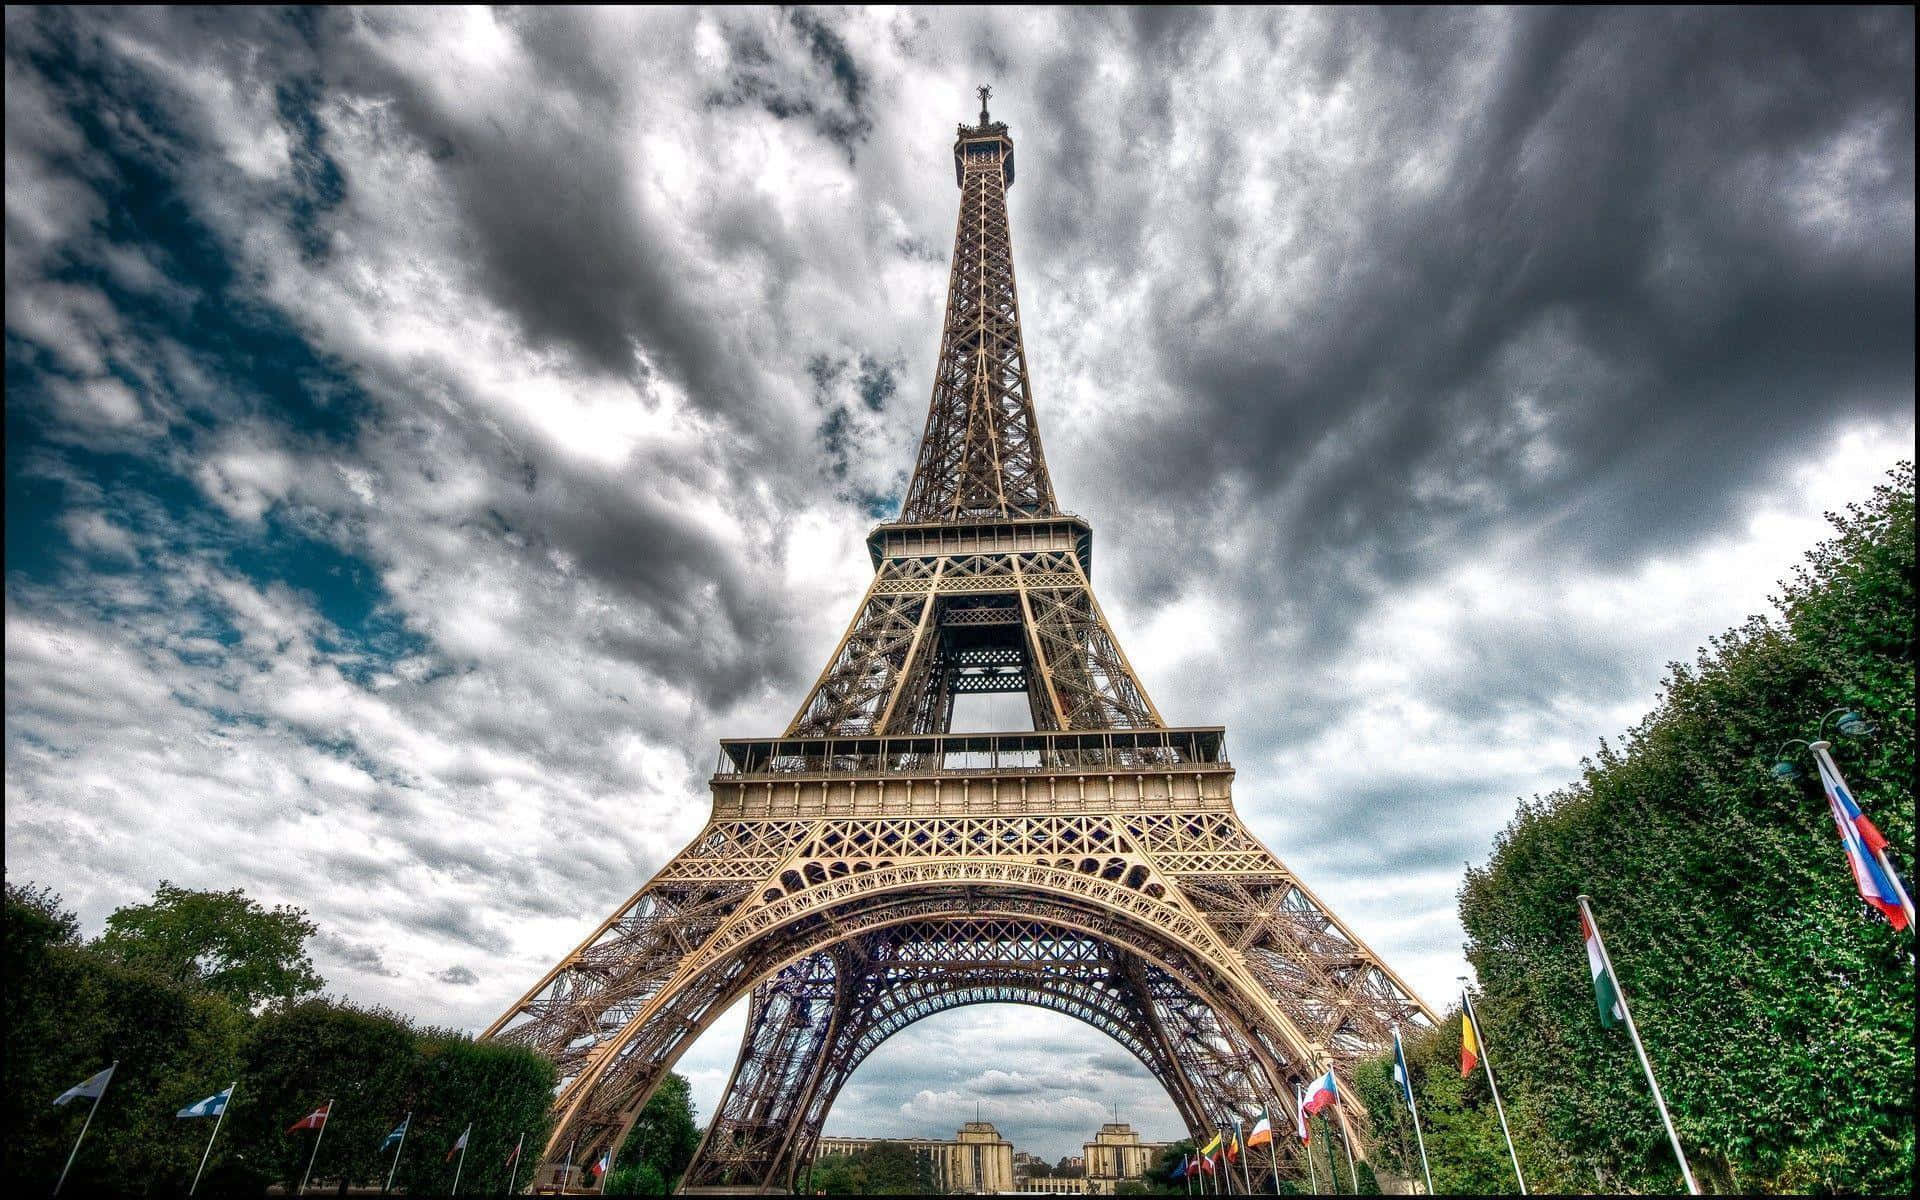 Sample the view at the iconic Eiffel Tower.